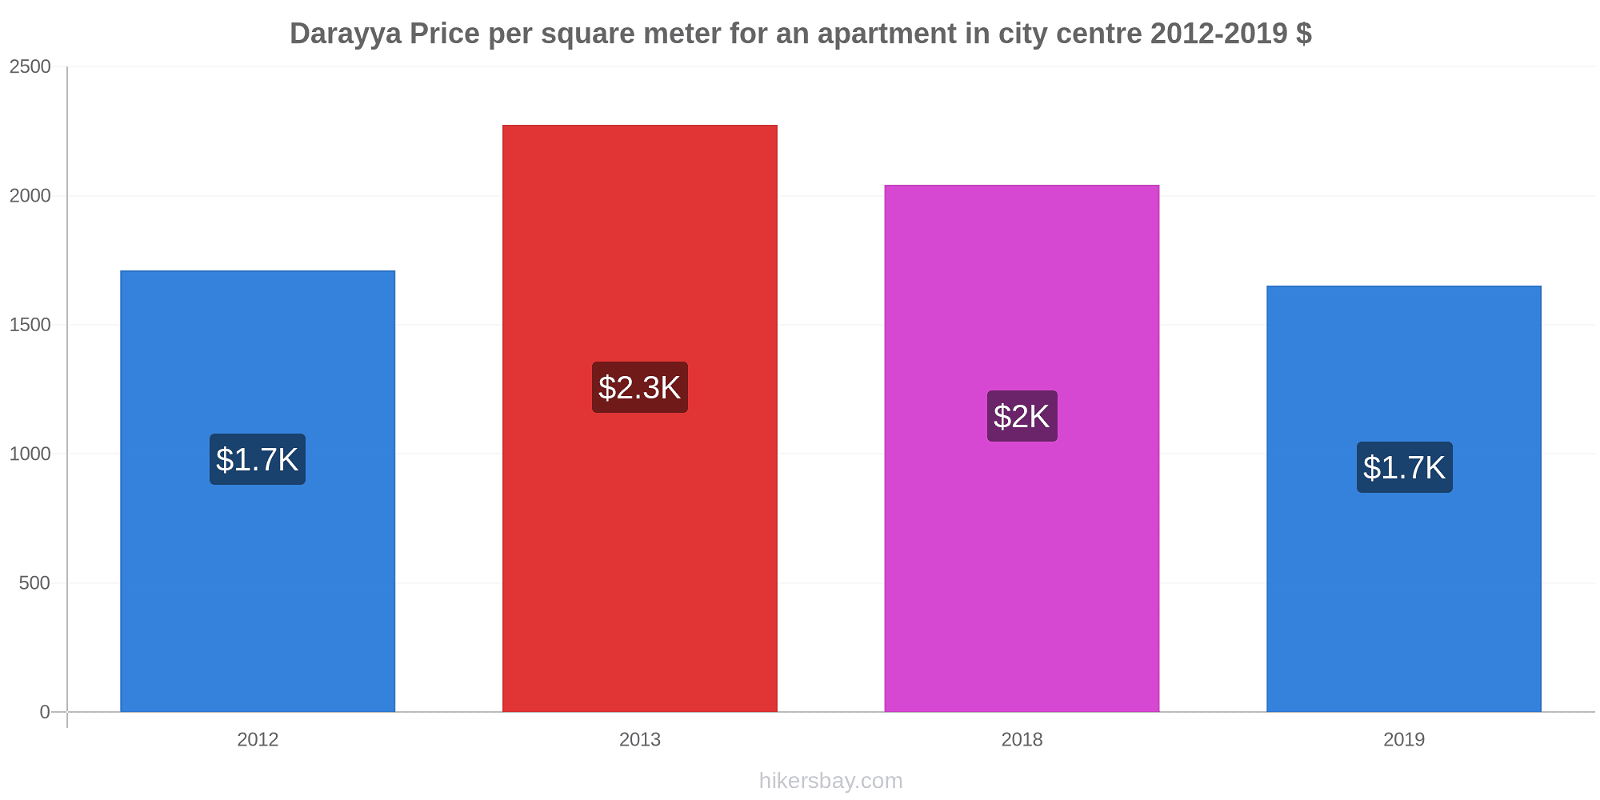 Darayya price changes Price per square meter for an apartment in city centre hikersbay.com